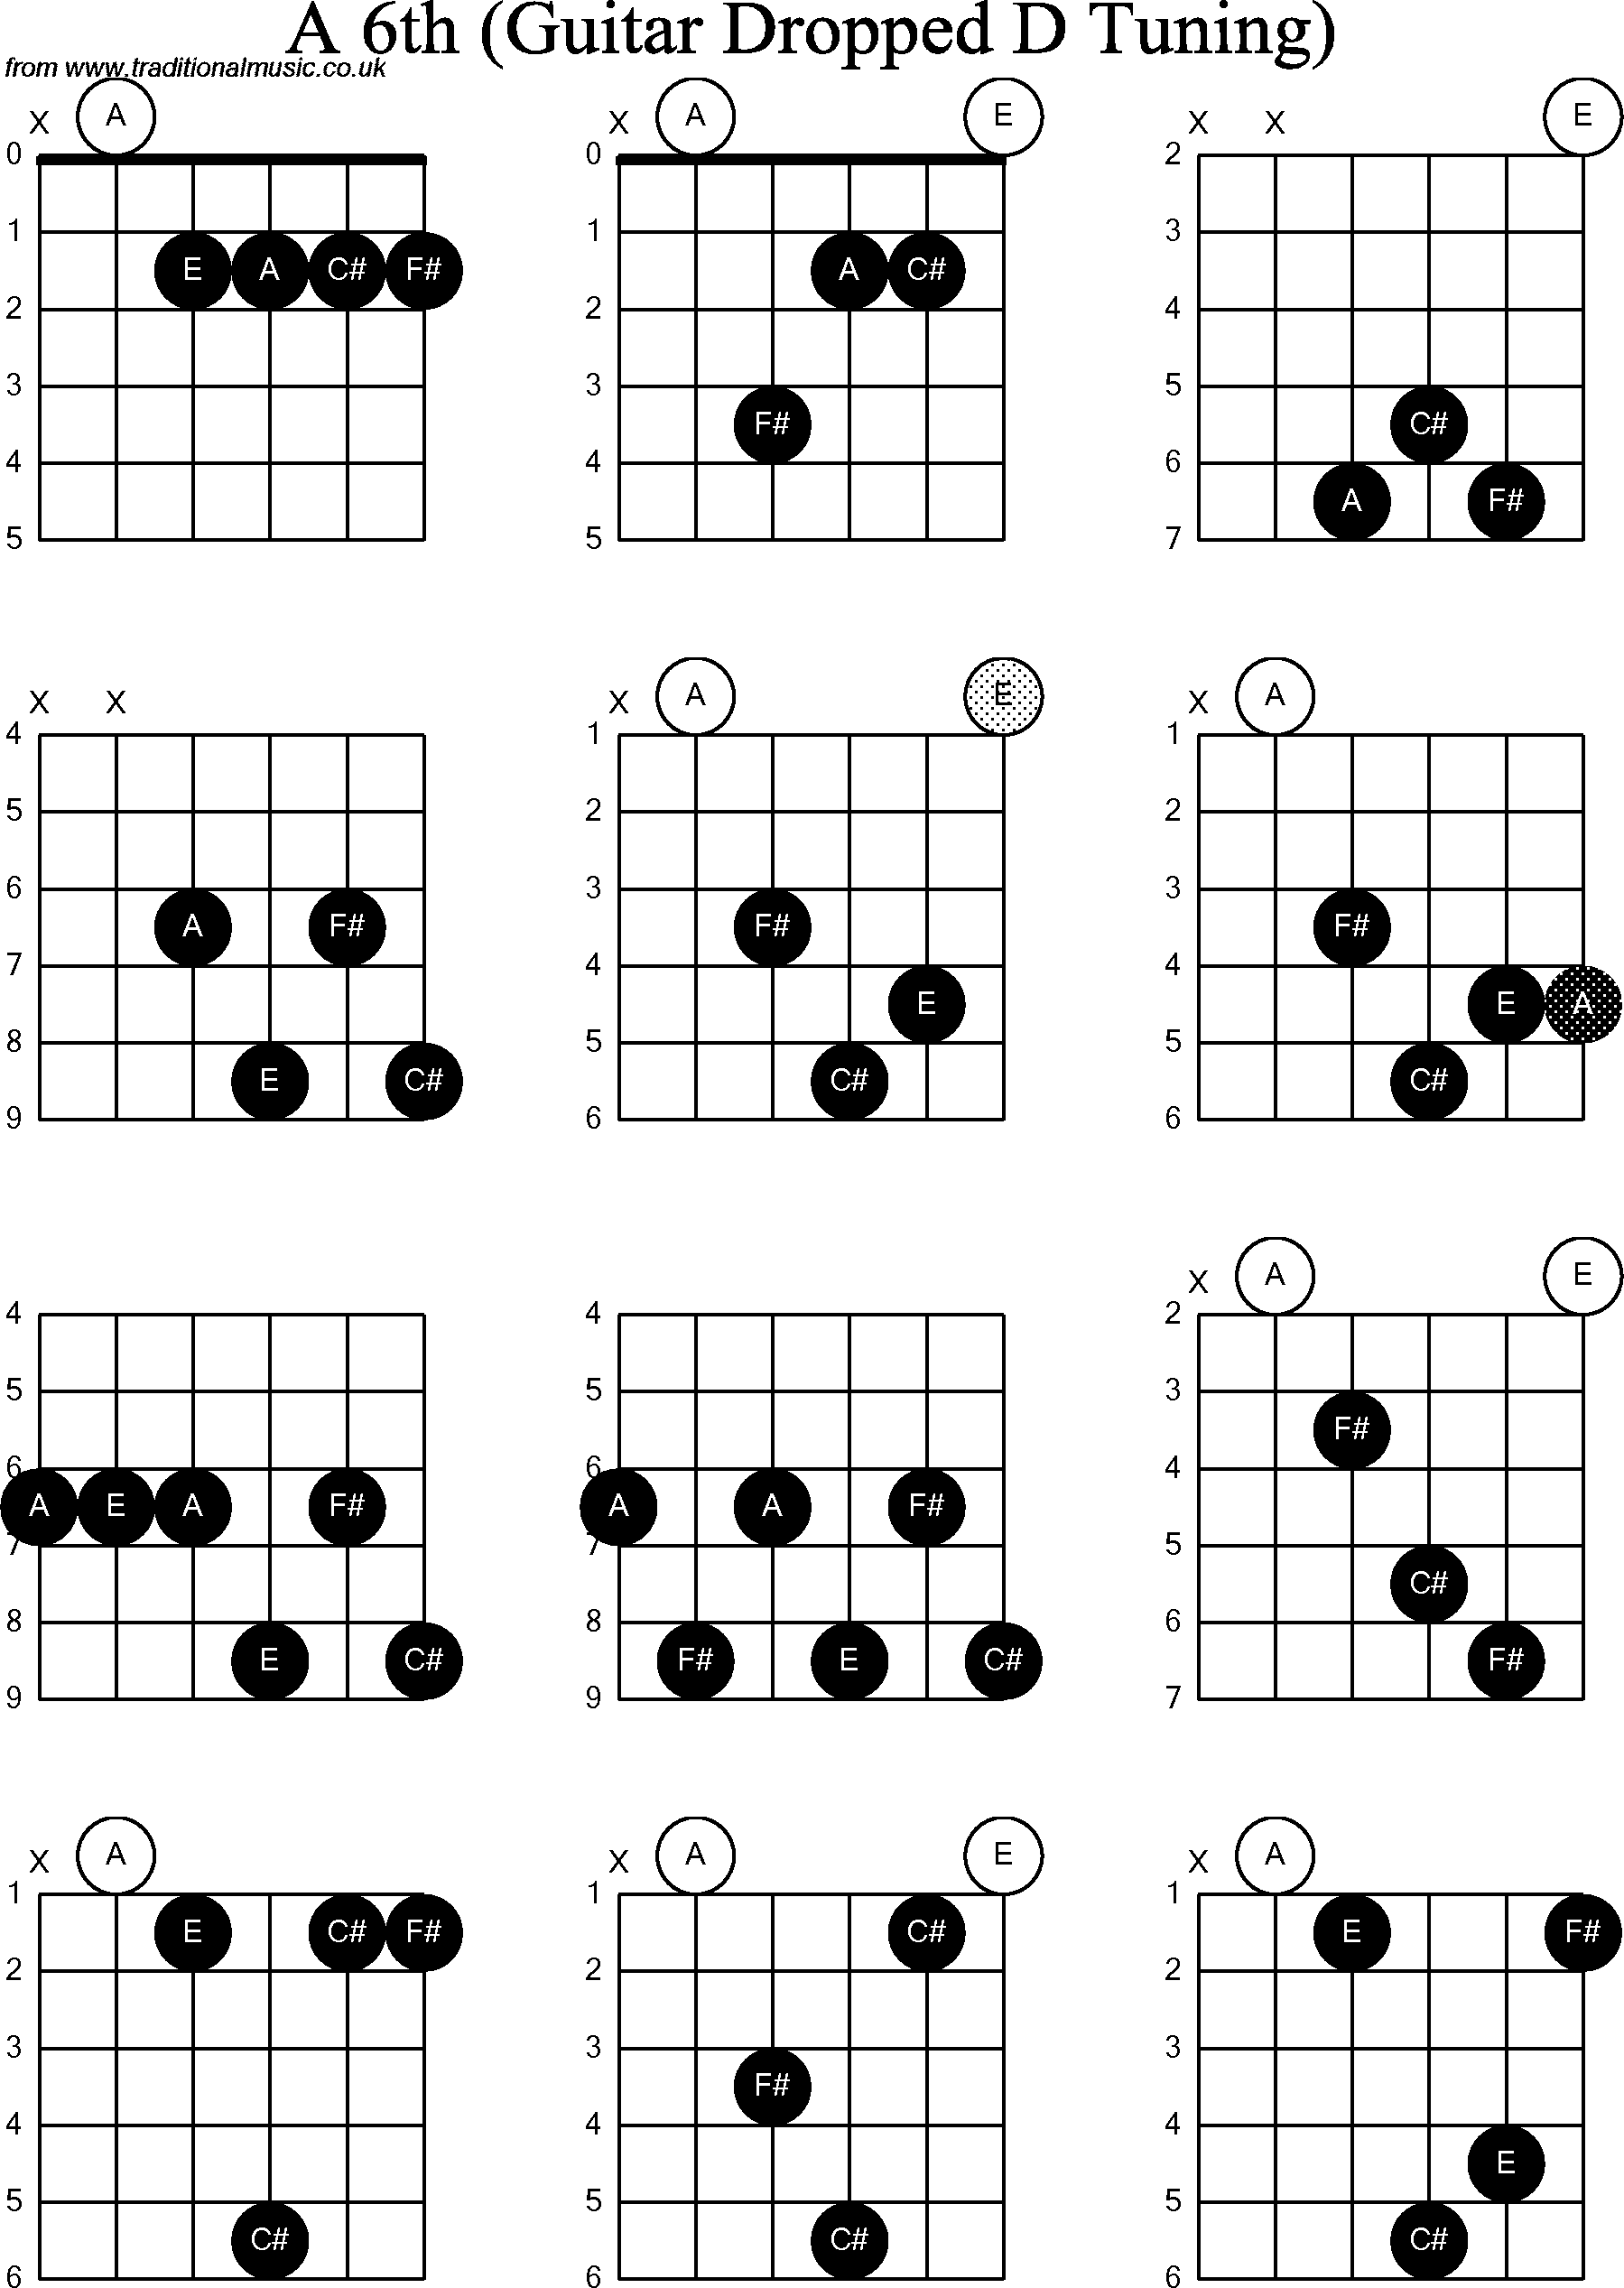 Chord diagrams for dropped D Guitar(DADGBE), A6th